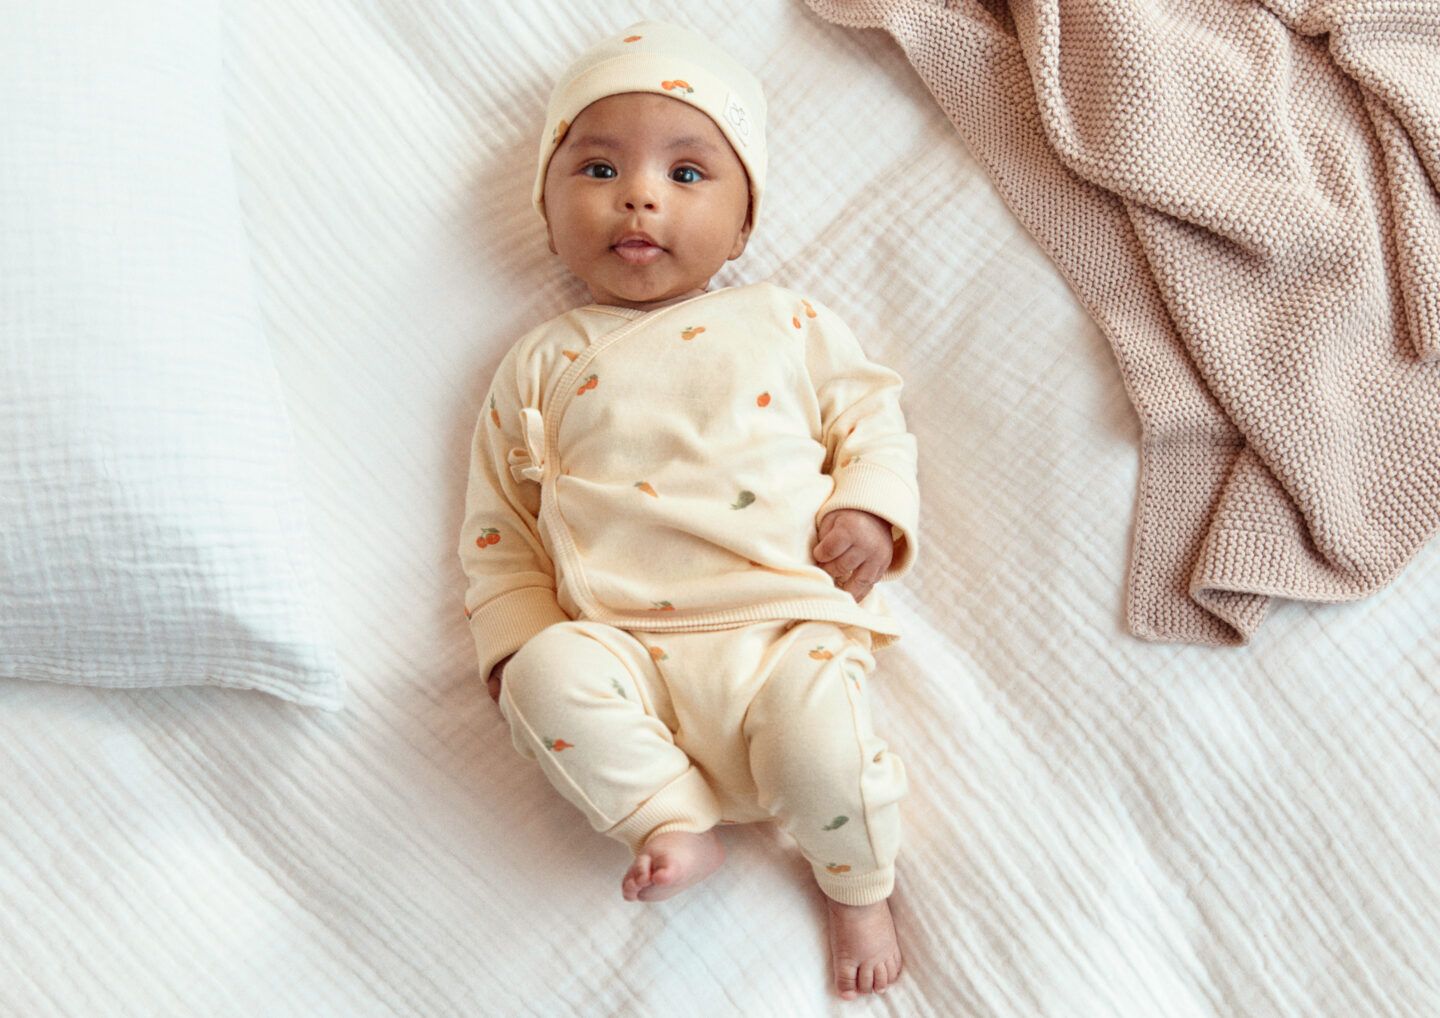 H&M Cradle to Cradle Sustainable Baby Clothes